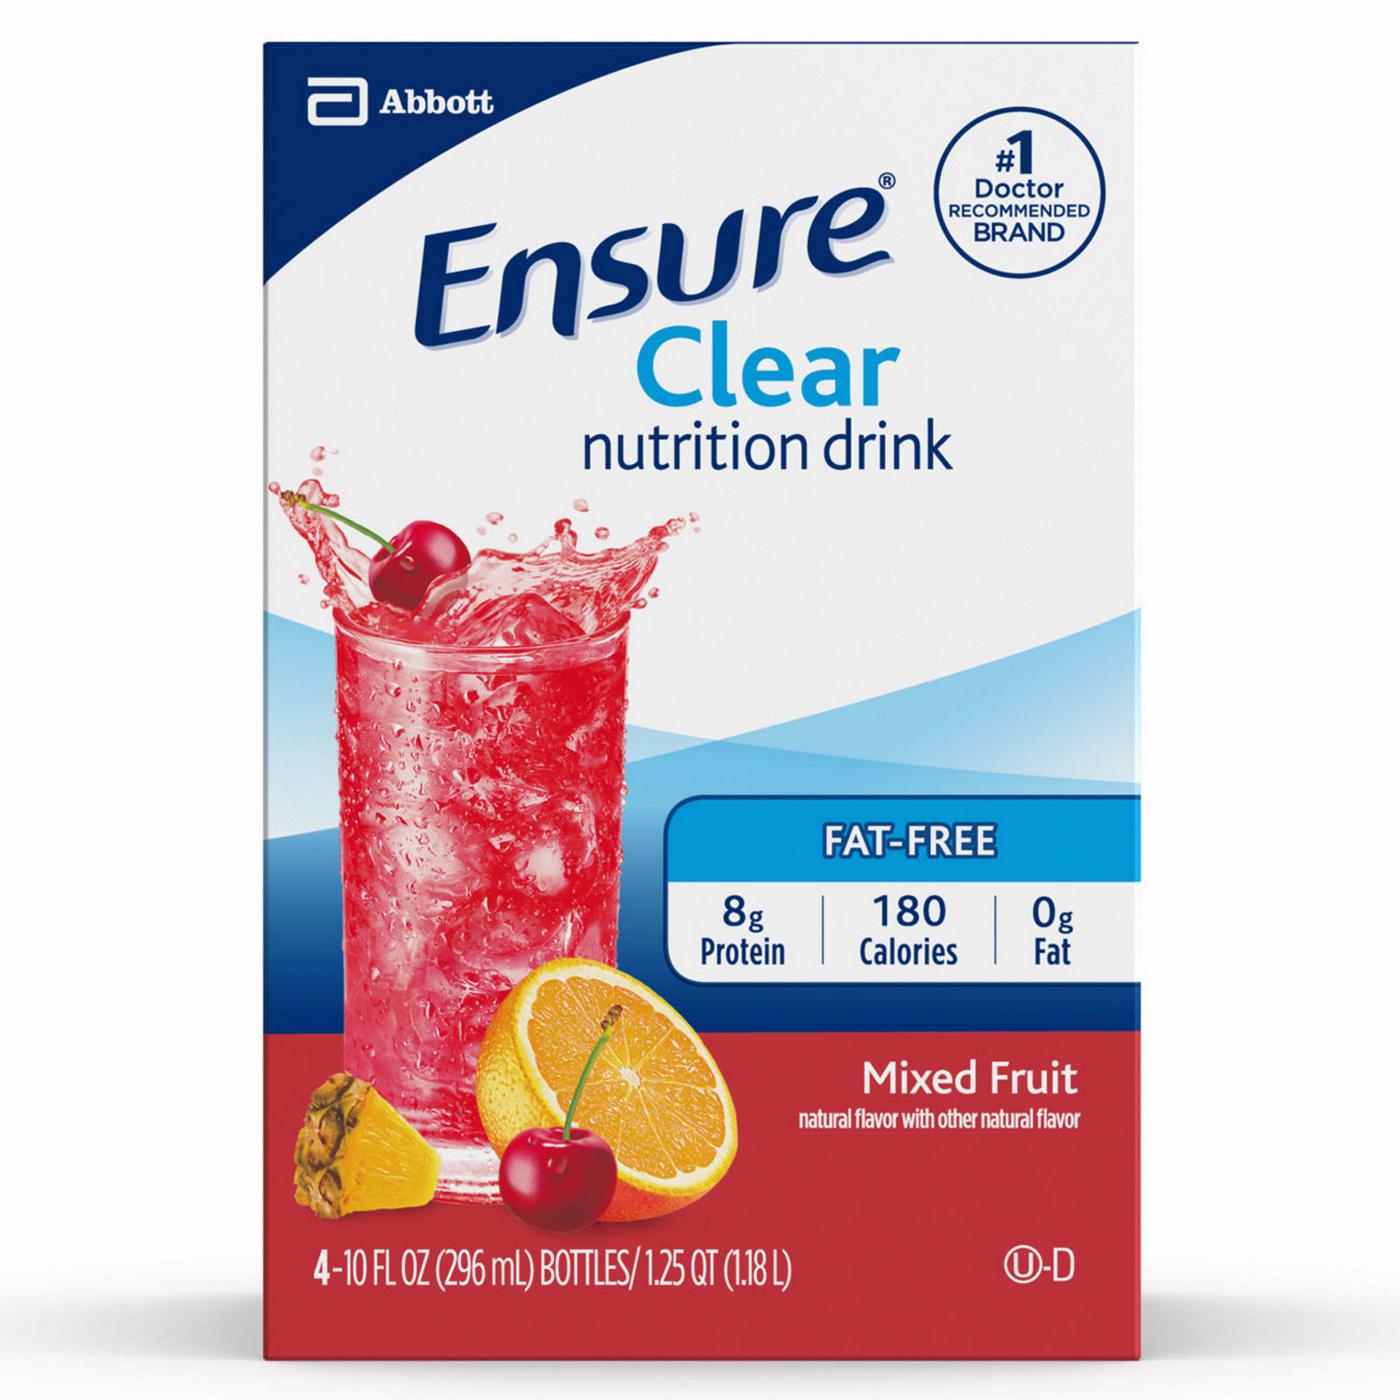 Ensure Pre-Surgery, Clear Carbohydrate Drink, Strawberry, 10 Fl Oz